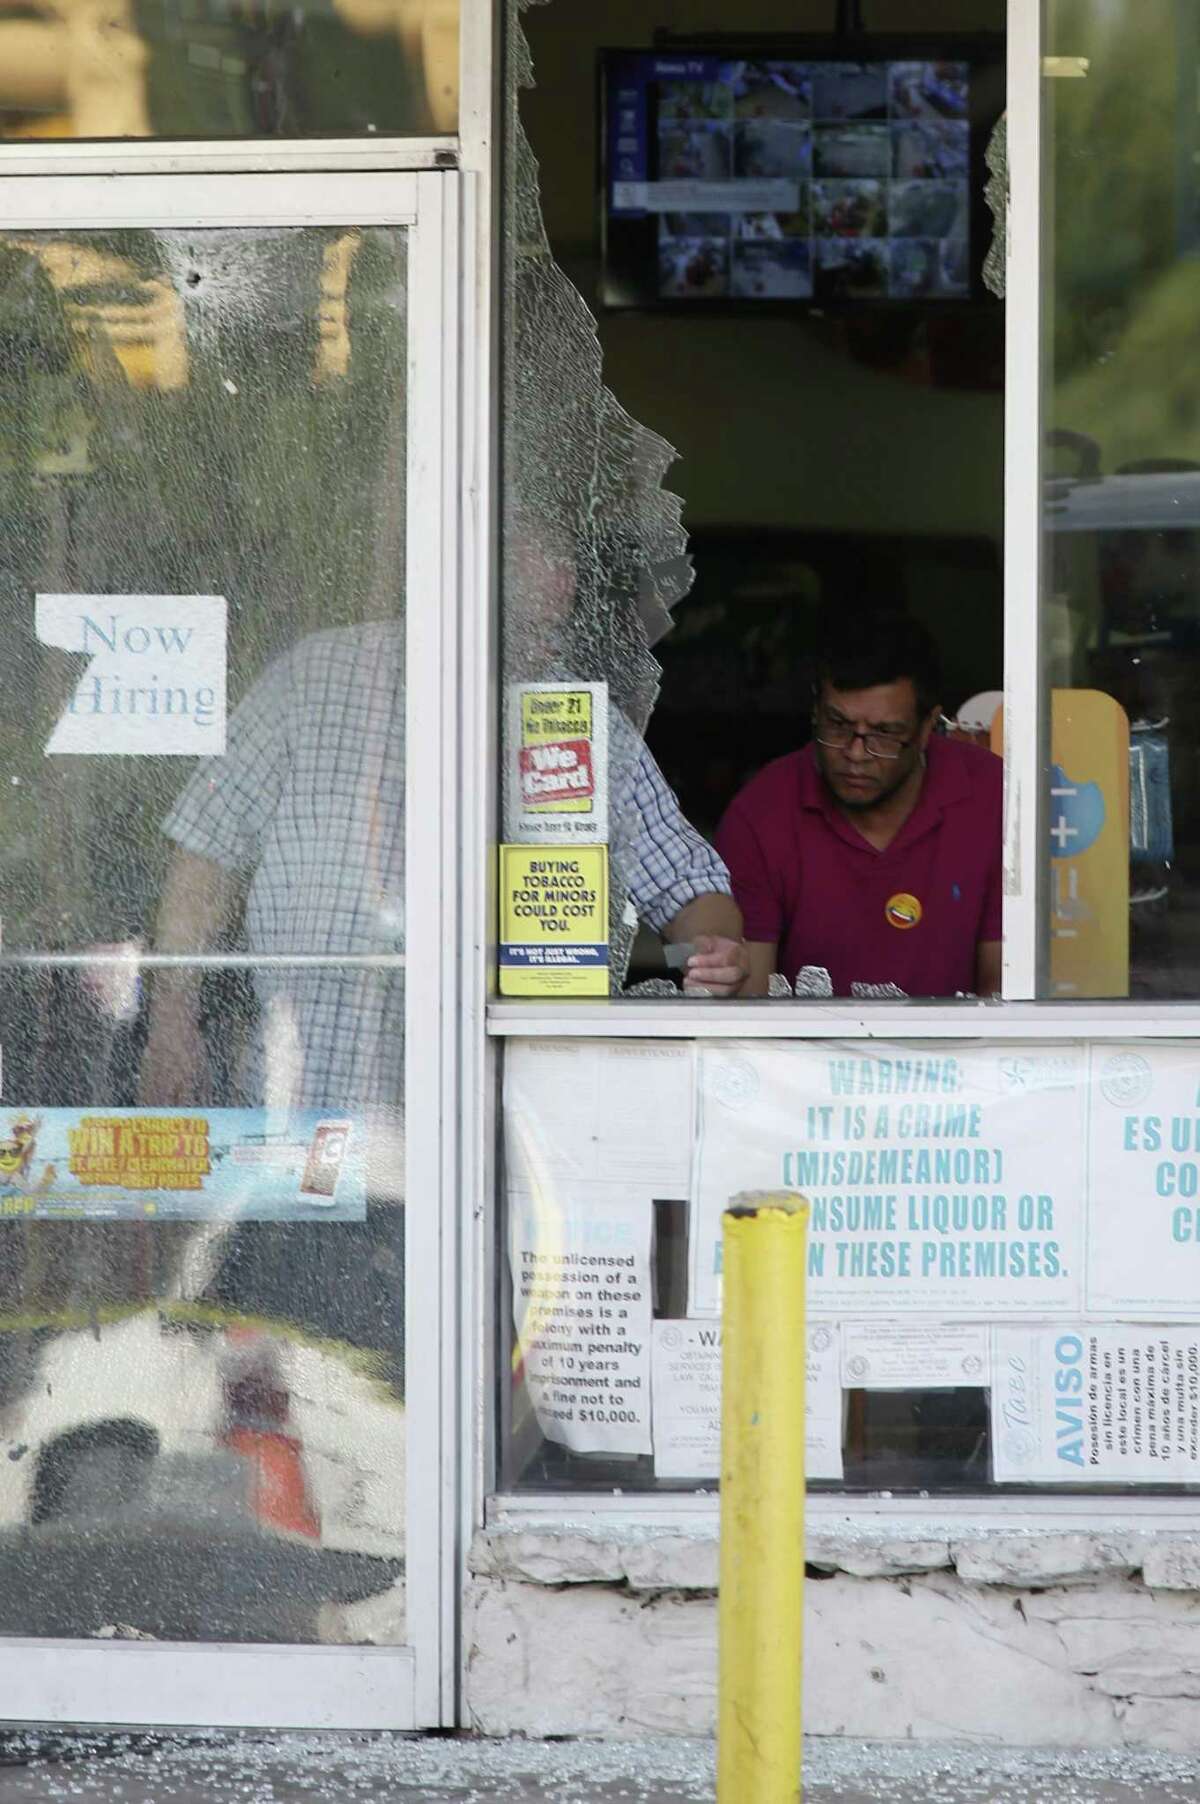 Personnel clean up shattered glass at the Hays Food Mart at the corner of North New Braunfels Avenue and Hays Street, Sunday, Sept. 17, 2017. Earlier in the morning, three people were shot in a drive-by shooting at the store.